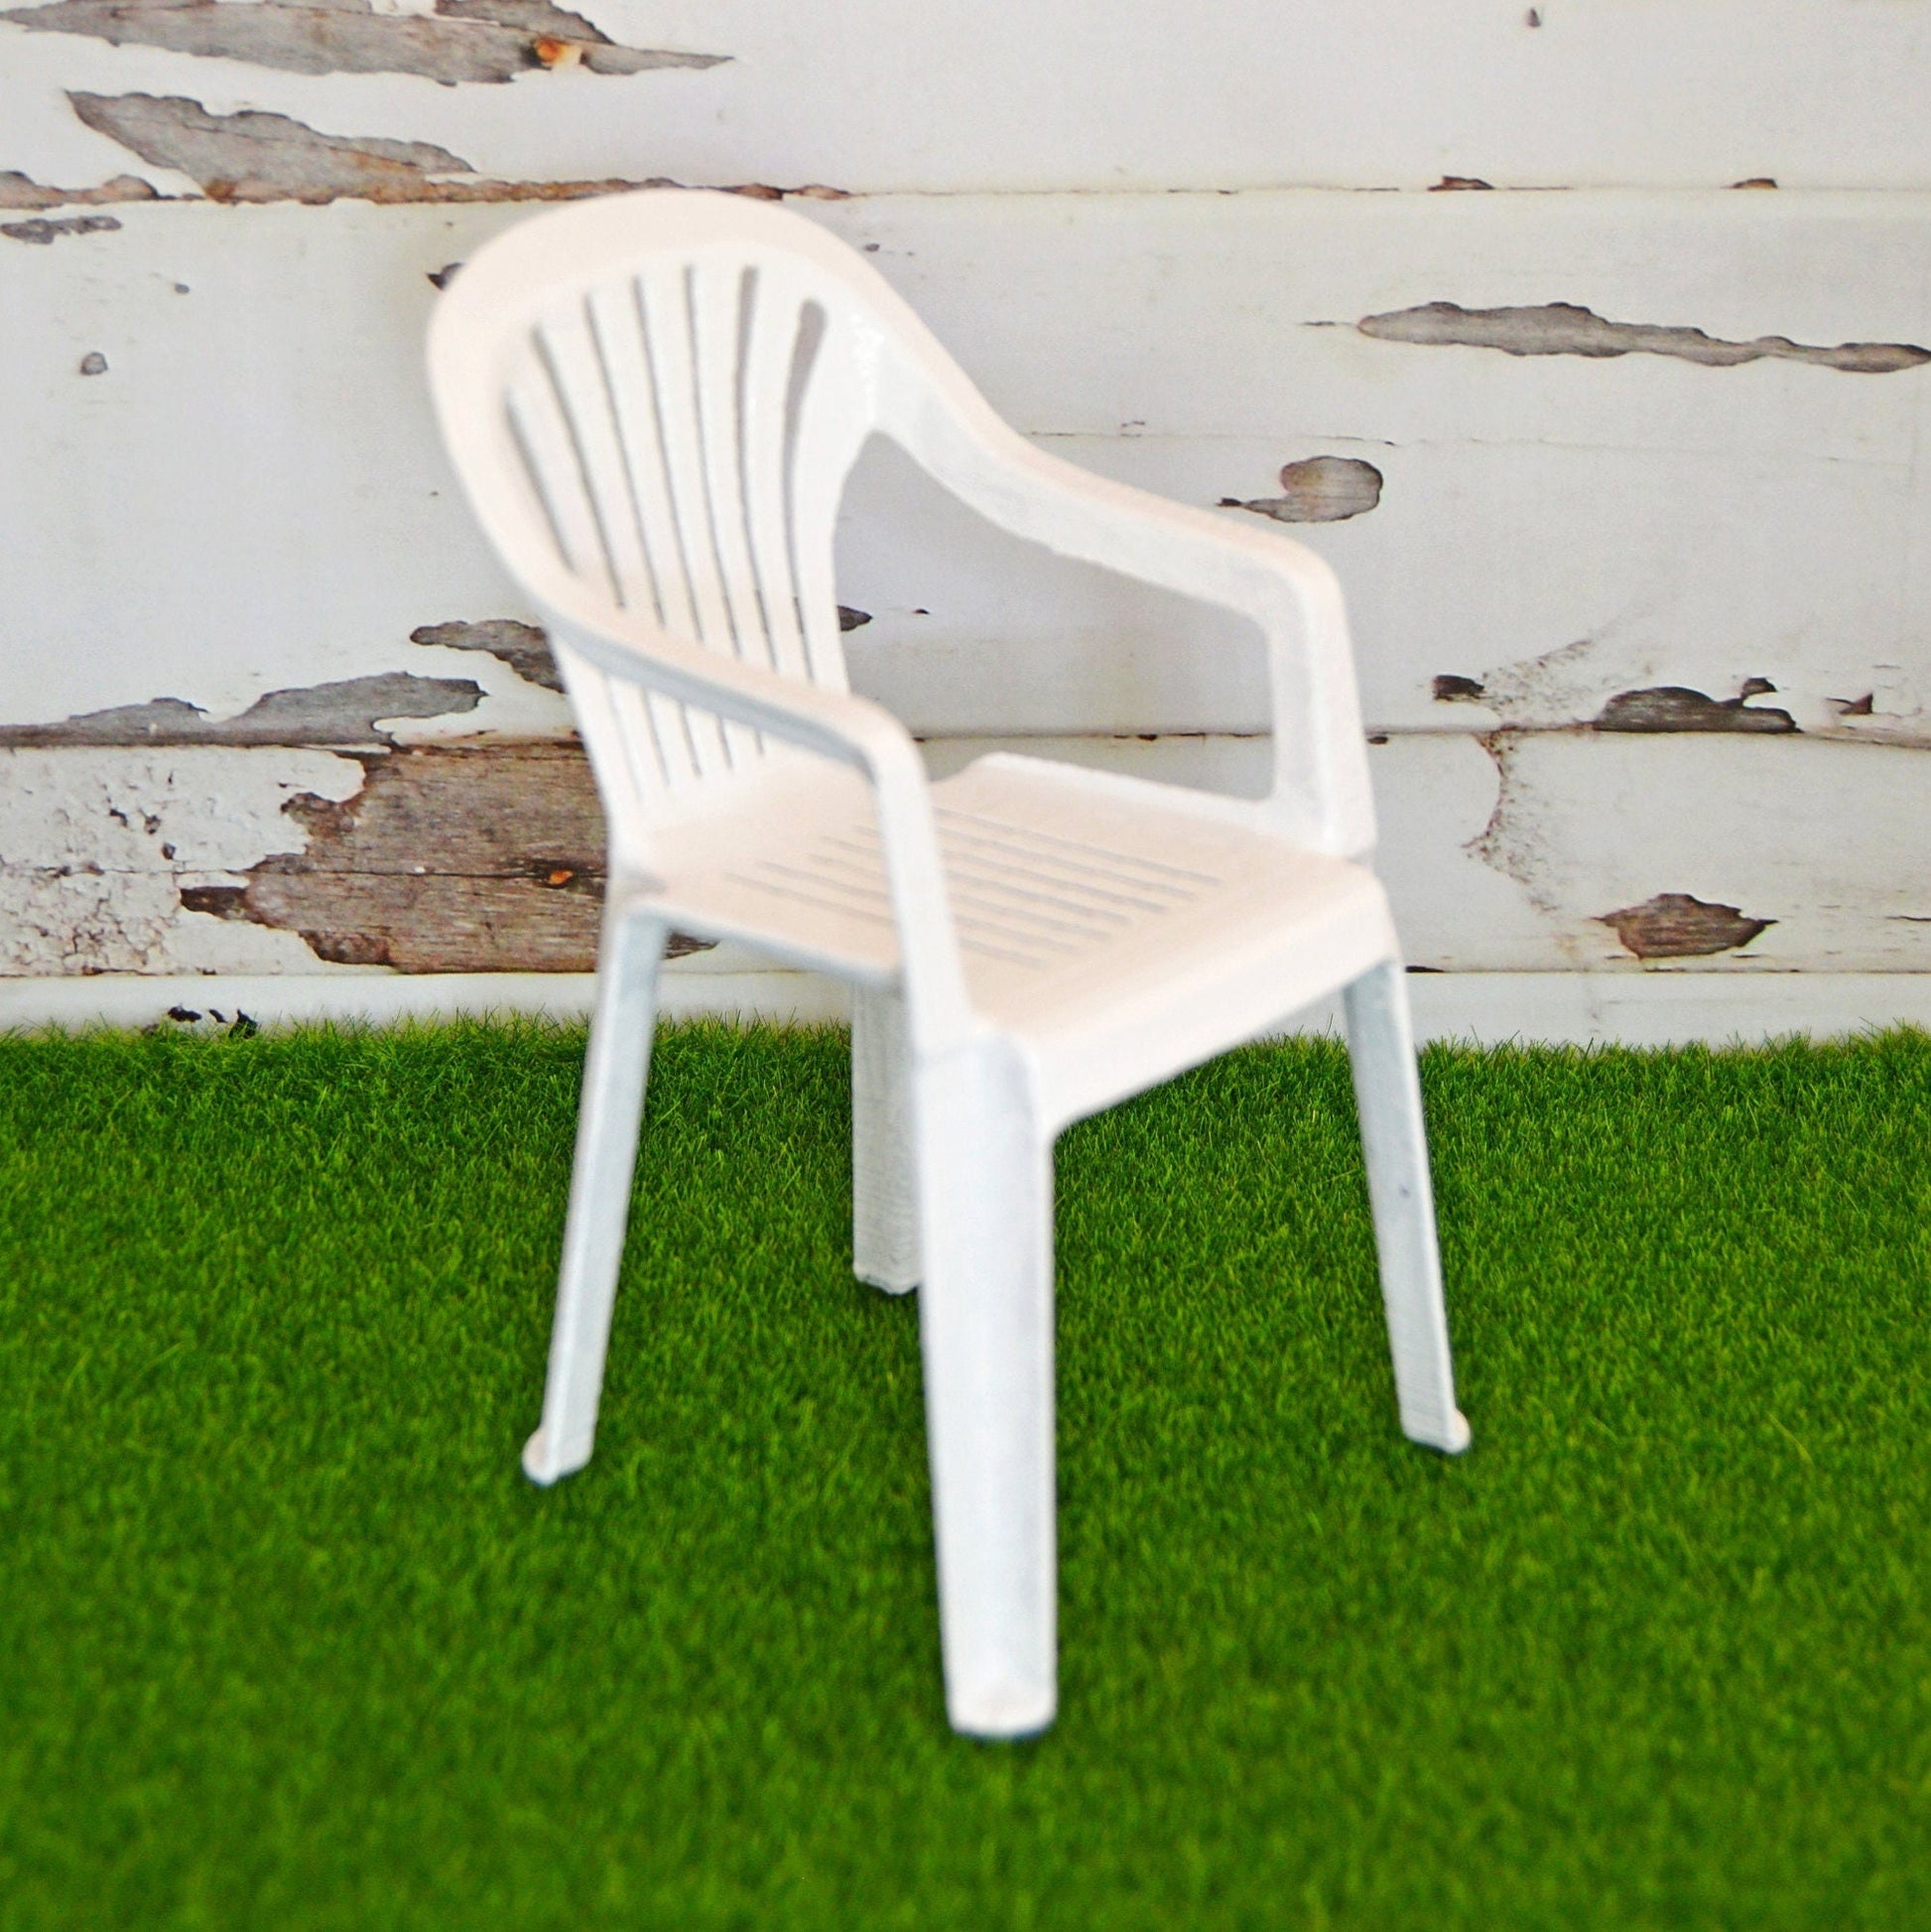 Miniature Lawn Chair for Dollhouse Outdoor Furniture, Dollhouse Lounge Chair, Dollhouse Patio Furniture, 1 6 Scale Chair, Summer Dollhouse